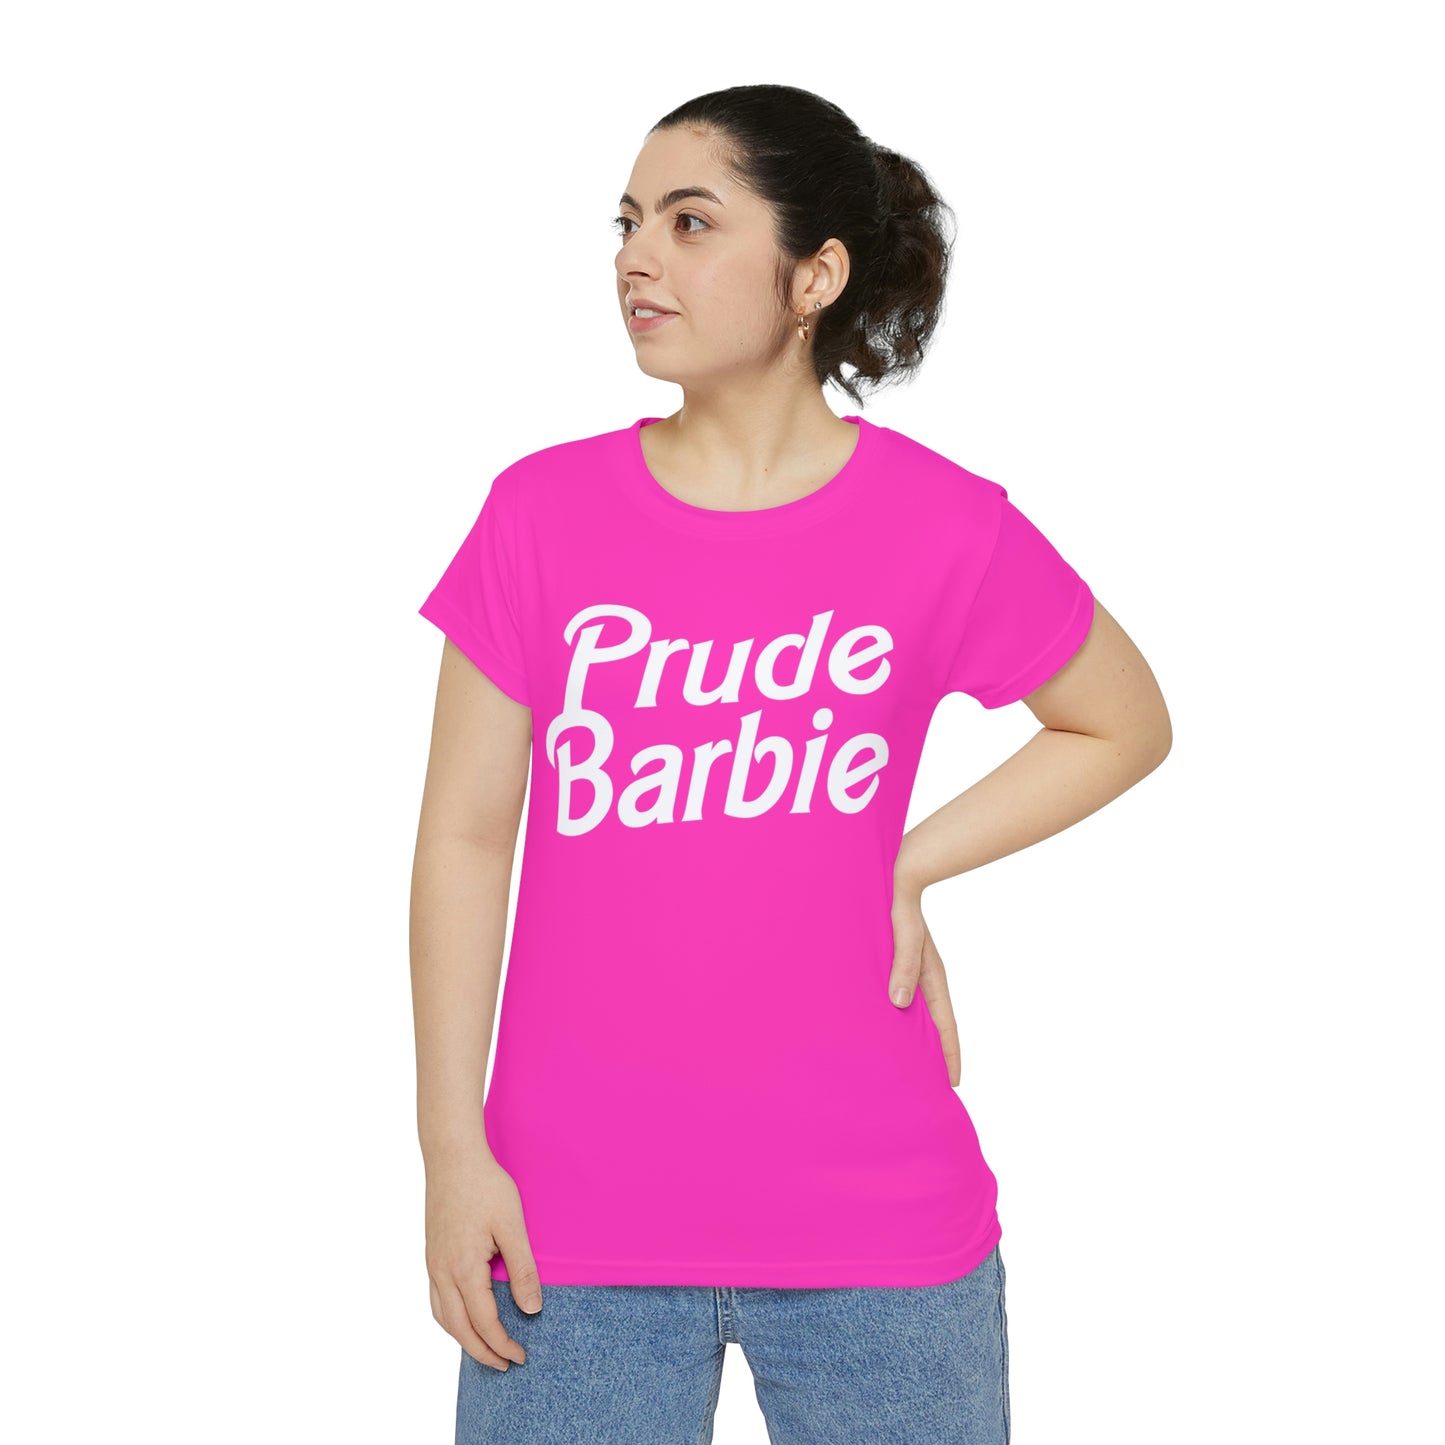 Prude Barbie, Bachelorette Party Shirts, Bridesmaid Gifts, Here comes the Party Tees, Group Party Favor Shirts, Bridal Party Shirt for women